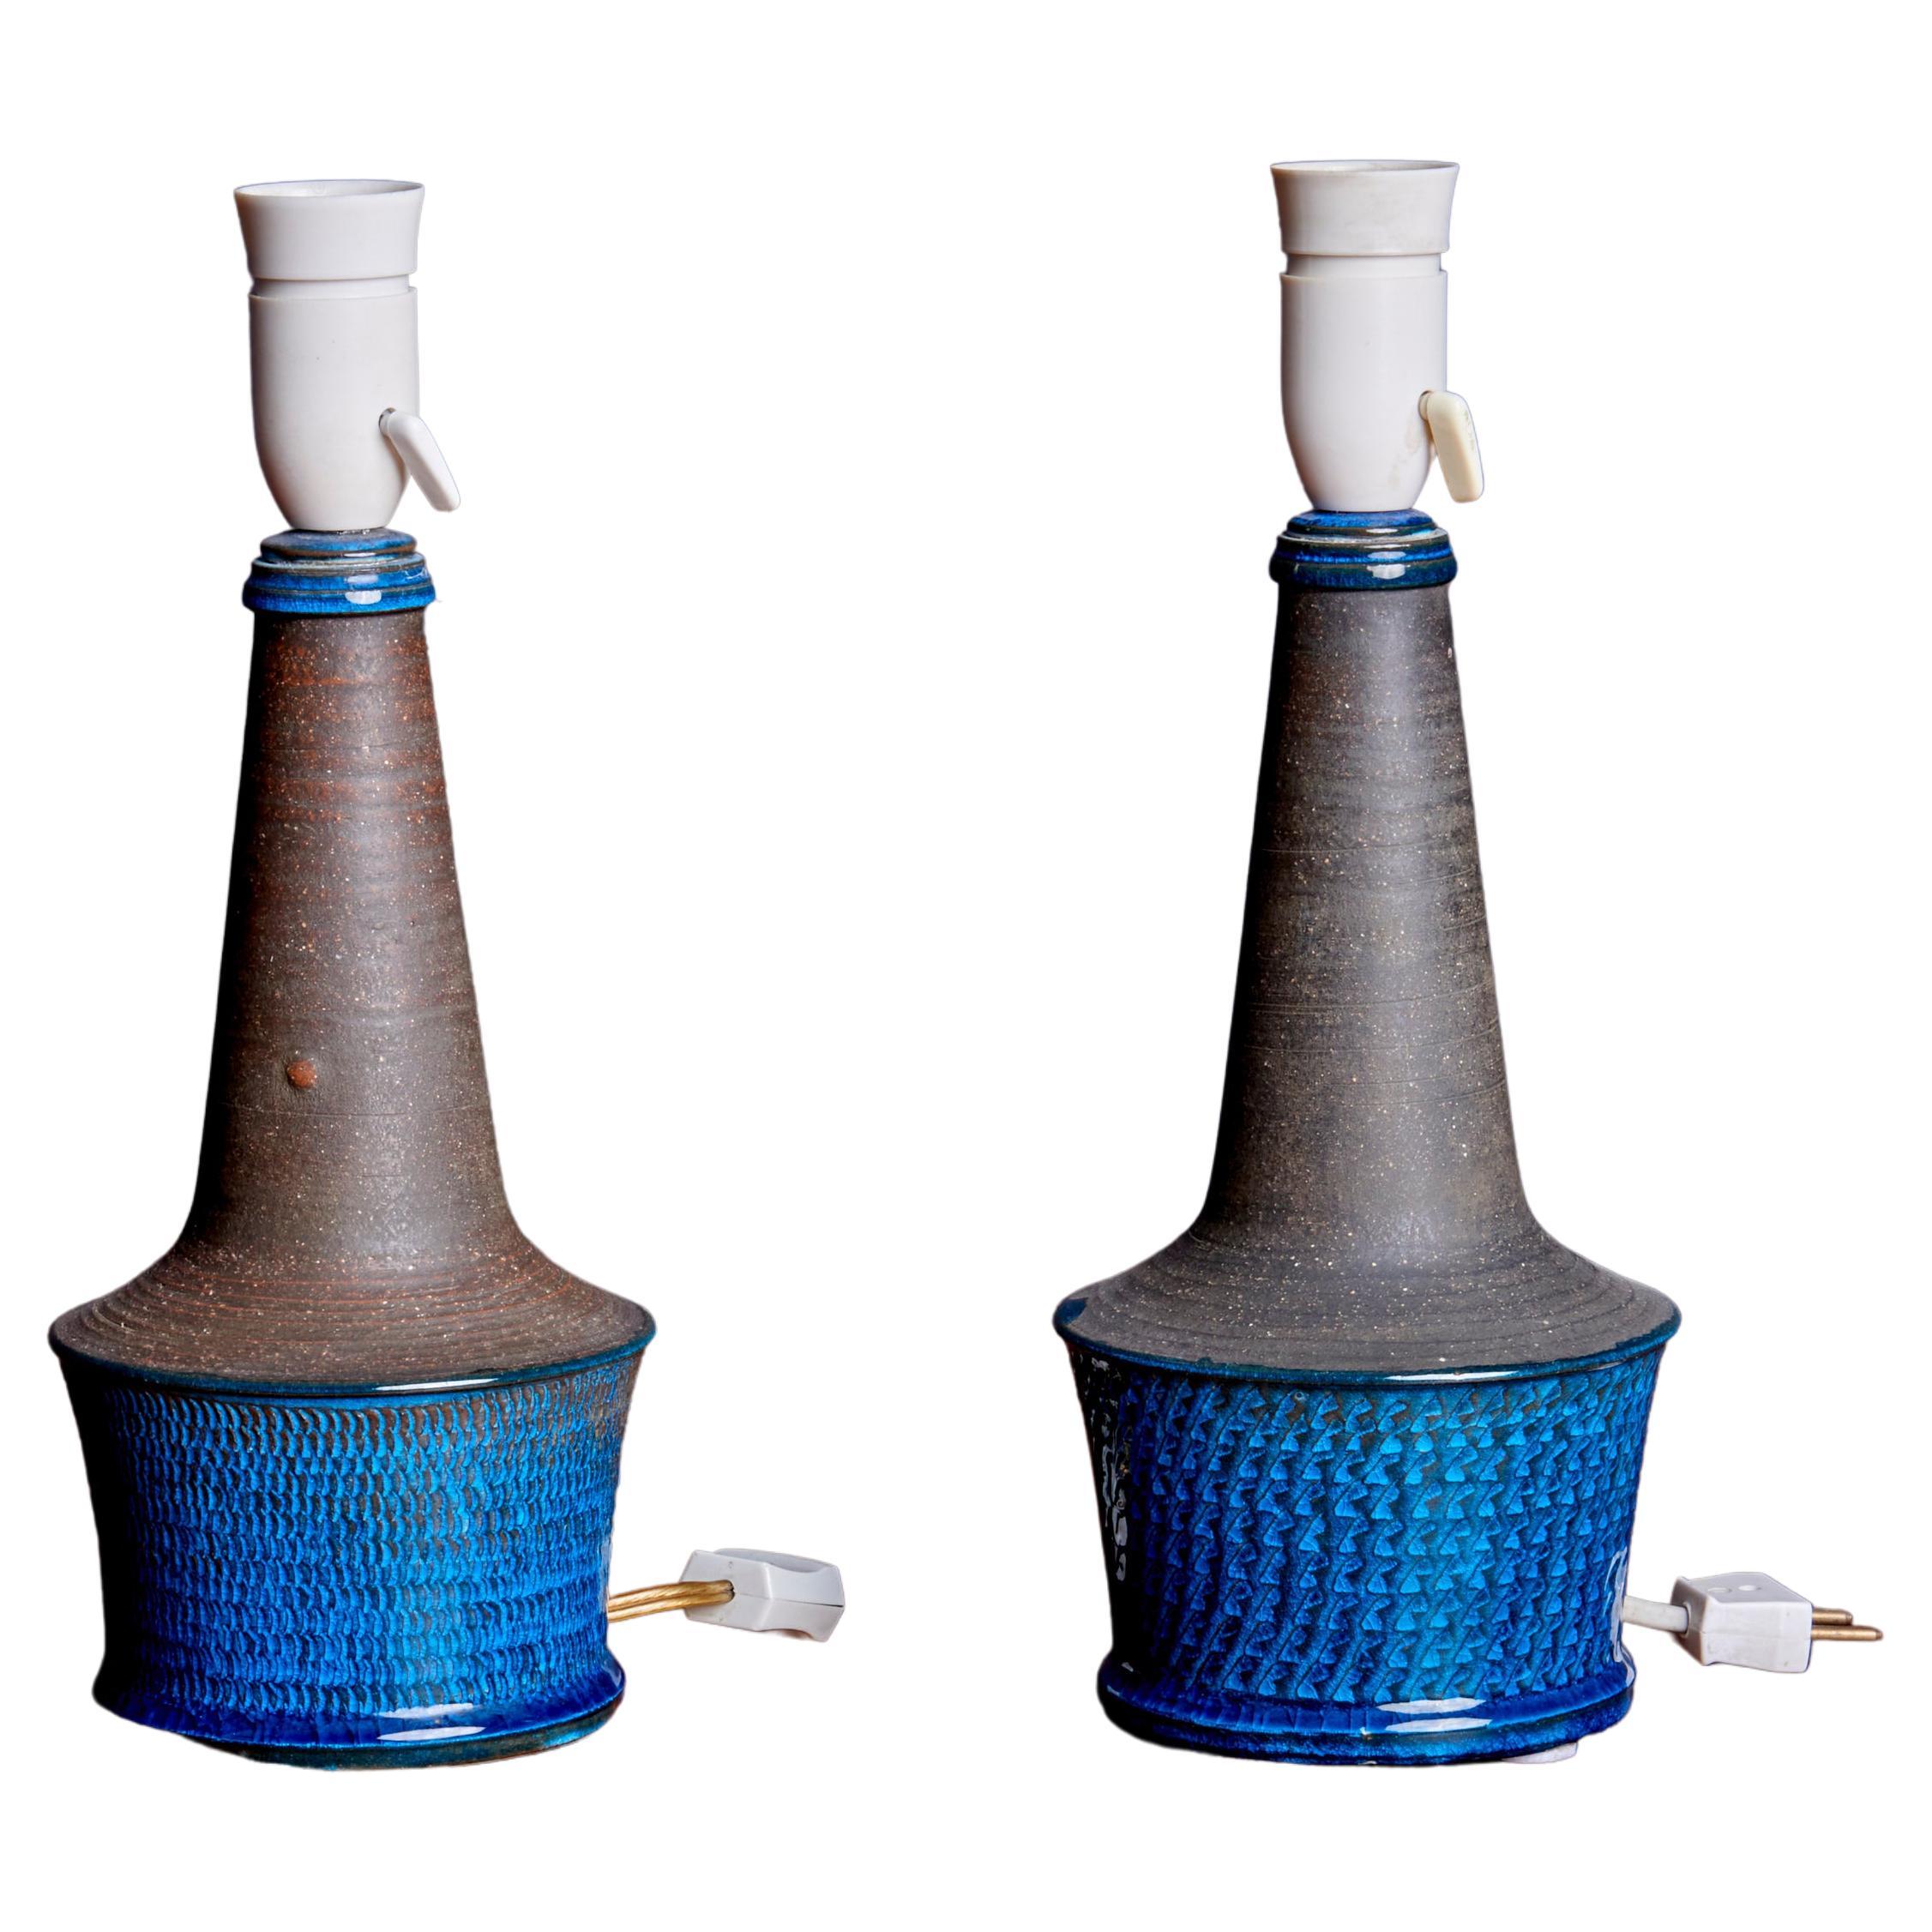 Pair of  Blue / Gray Table Lamps by Nils Kähler, Denmark, 1960s